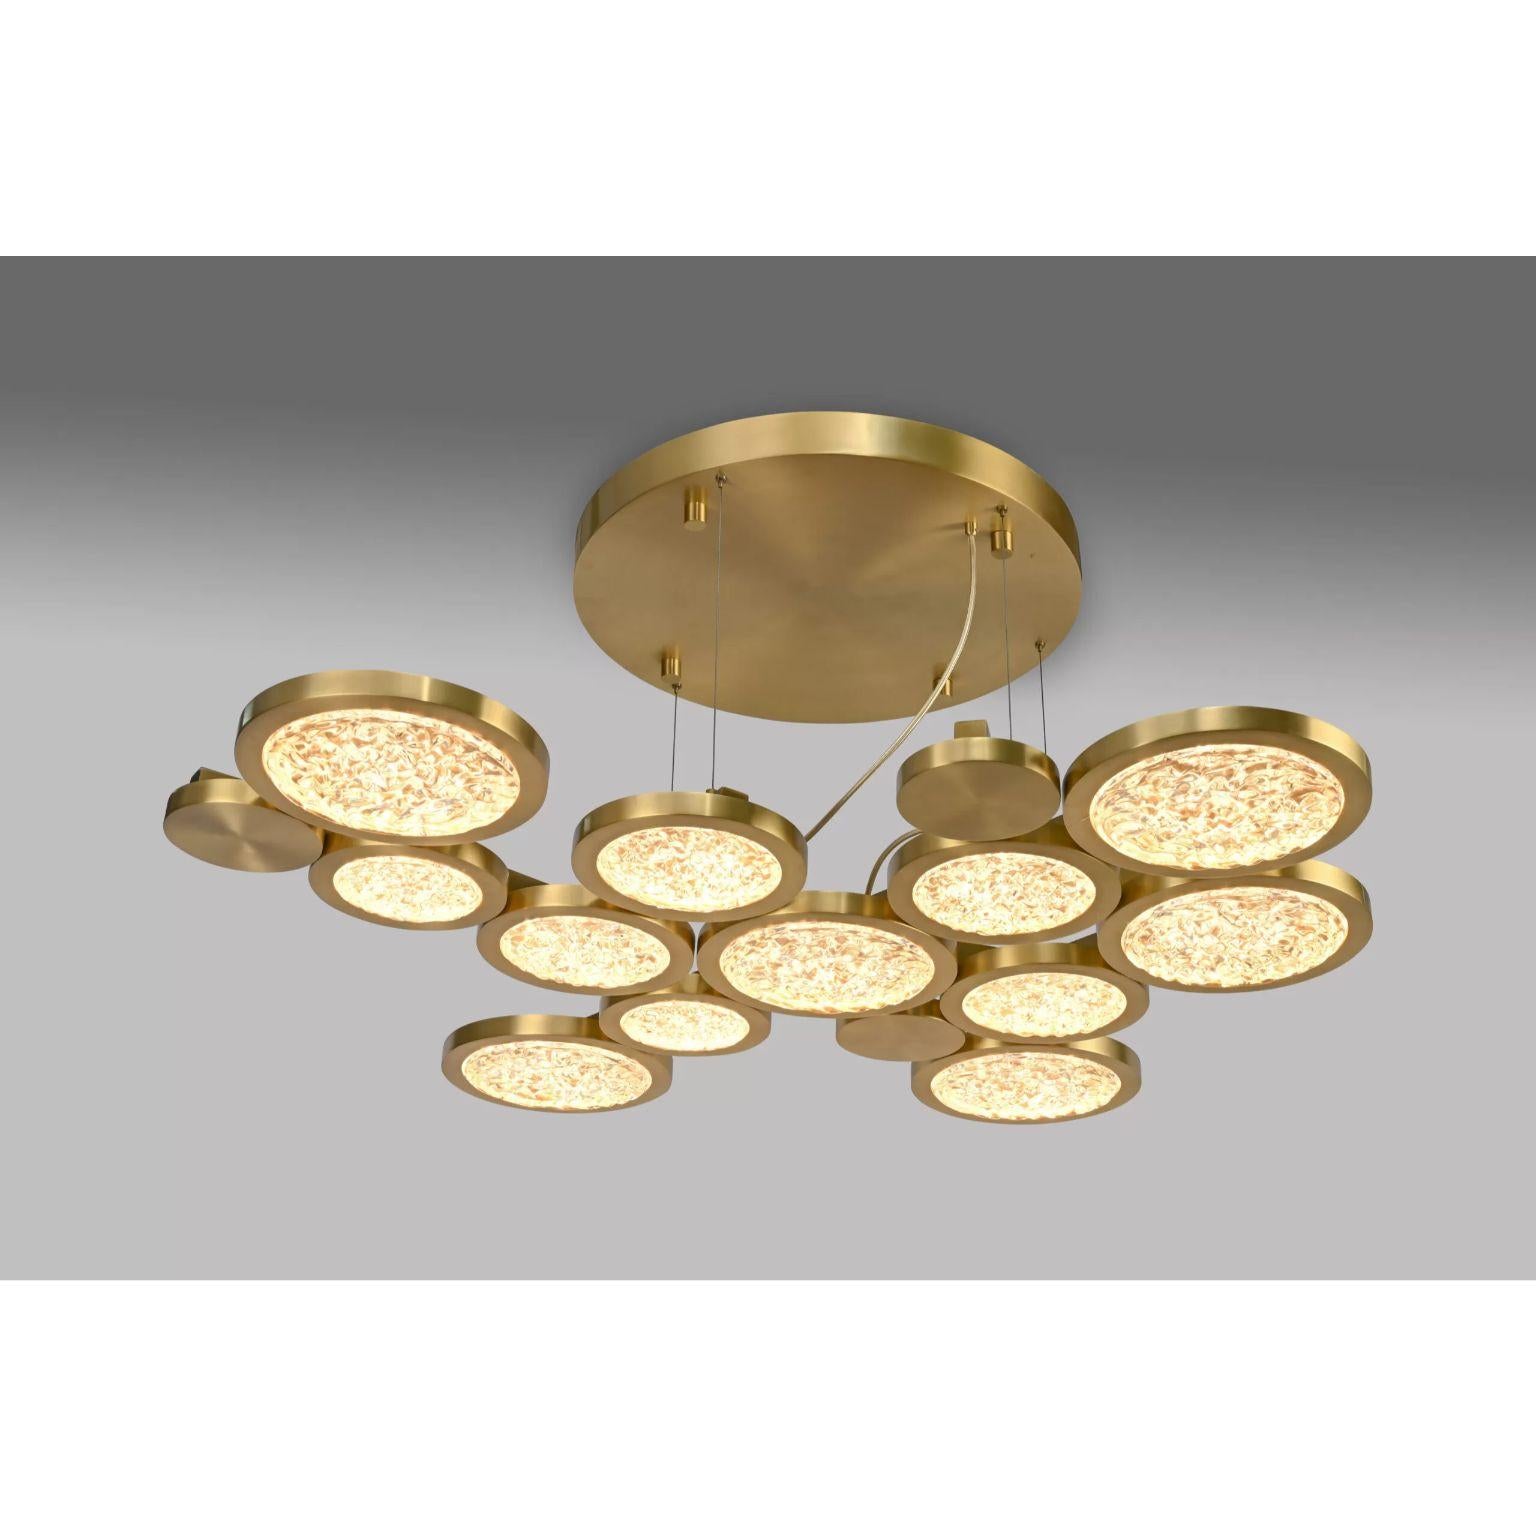 Circular Chandelier by Dainte
Dimensions: Ø 122 x H 150 cm.
Materials: Glass and brass. 

Dimensions may vary. Please contact us. 

A extraordinary mega circular chandelir featuring a combination of twelve textured glassand brass circles to create